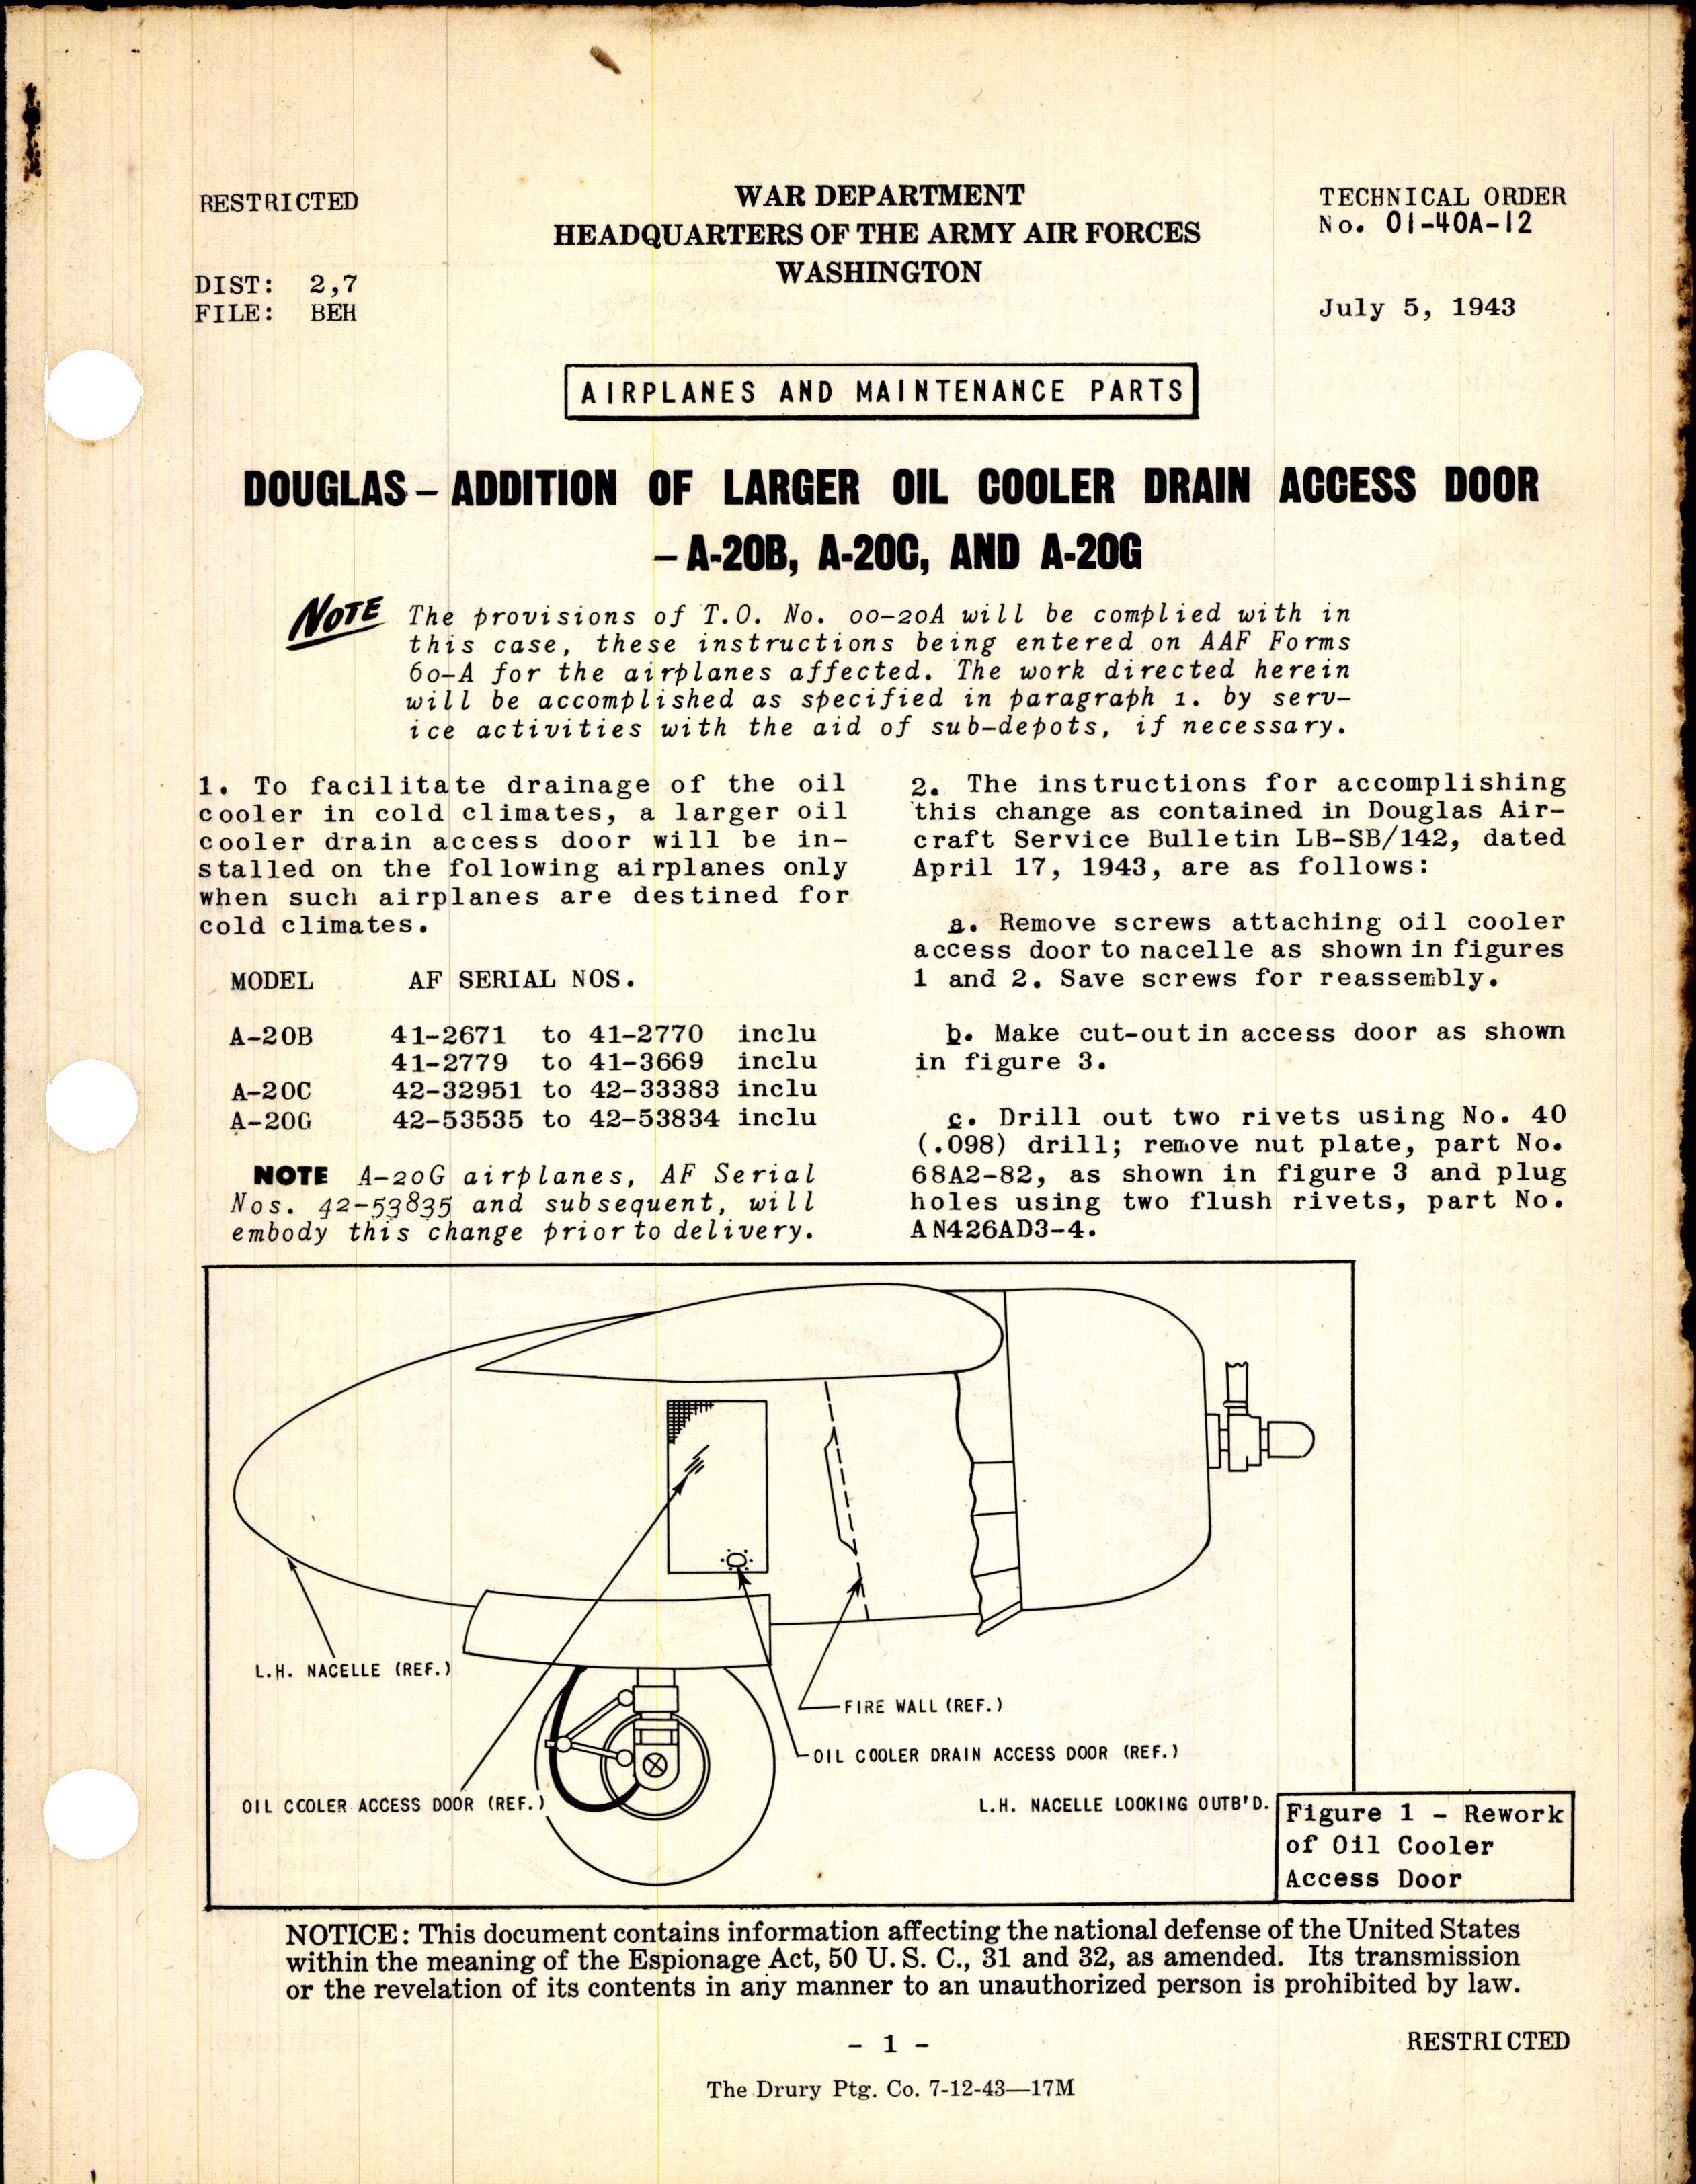 Sample page 1 from AirCorps Library document: Addition of Larger Oil Cooler Drain Access Door for A-20B, A-20C, and A-20G